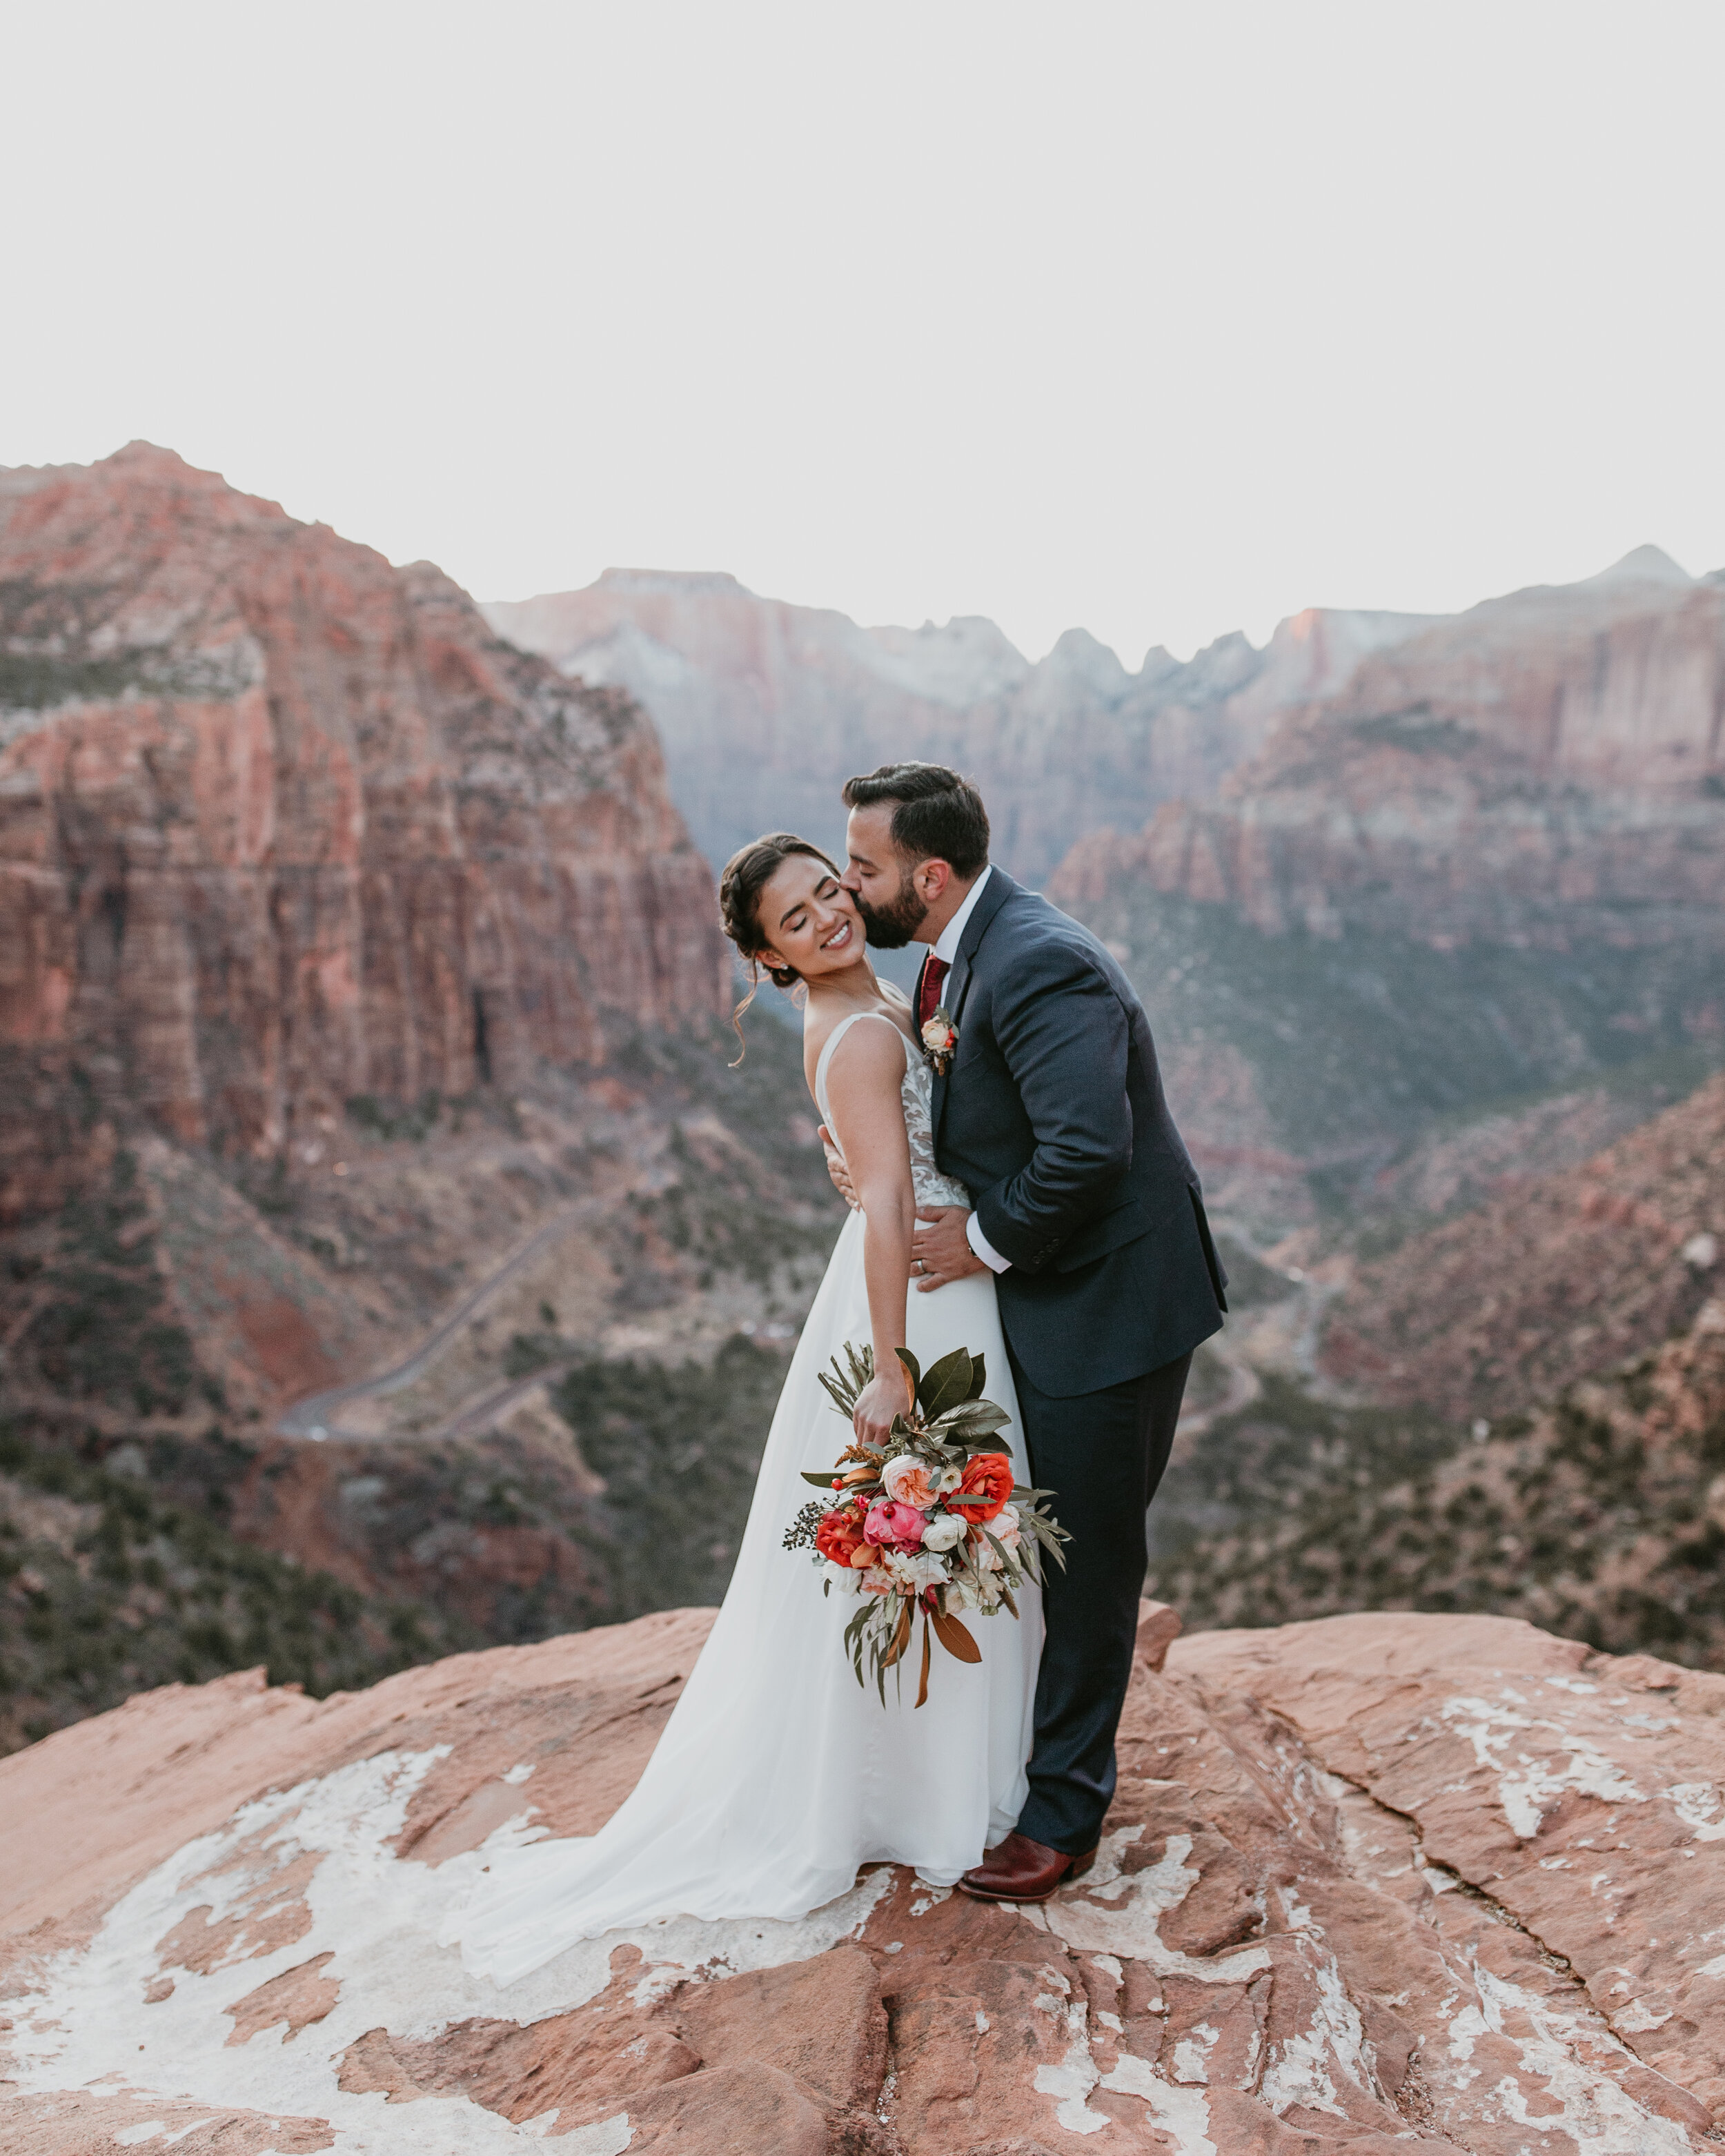 Nicole-Daacke-Photography-snowy-hiking-elopement-in-zion-national-park-zion-elopement-photographer-canyon-overlook-trial-brial-portraits-in-mt-zion-national-park-utah-desert-adventure-elopement-photographer-152.jpg